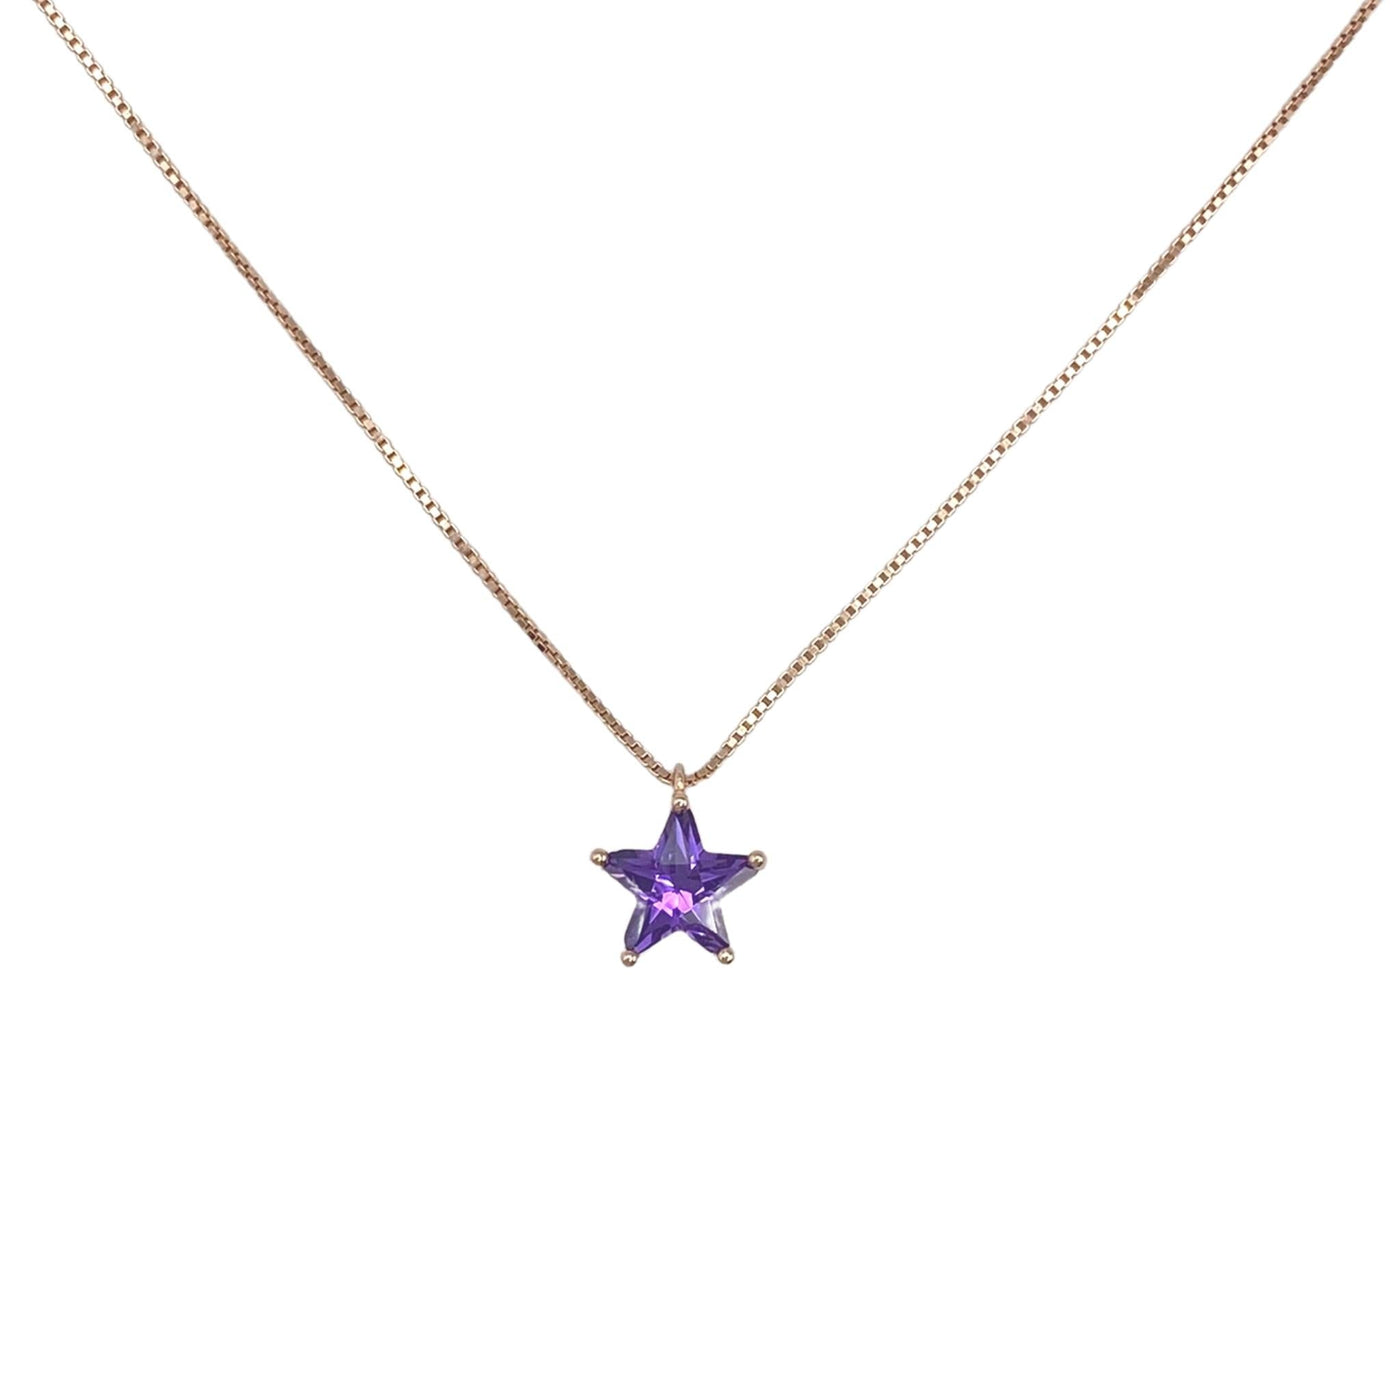 Silver necklace with star charm - 7 mm - rose